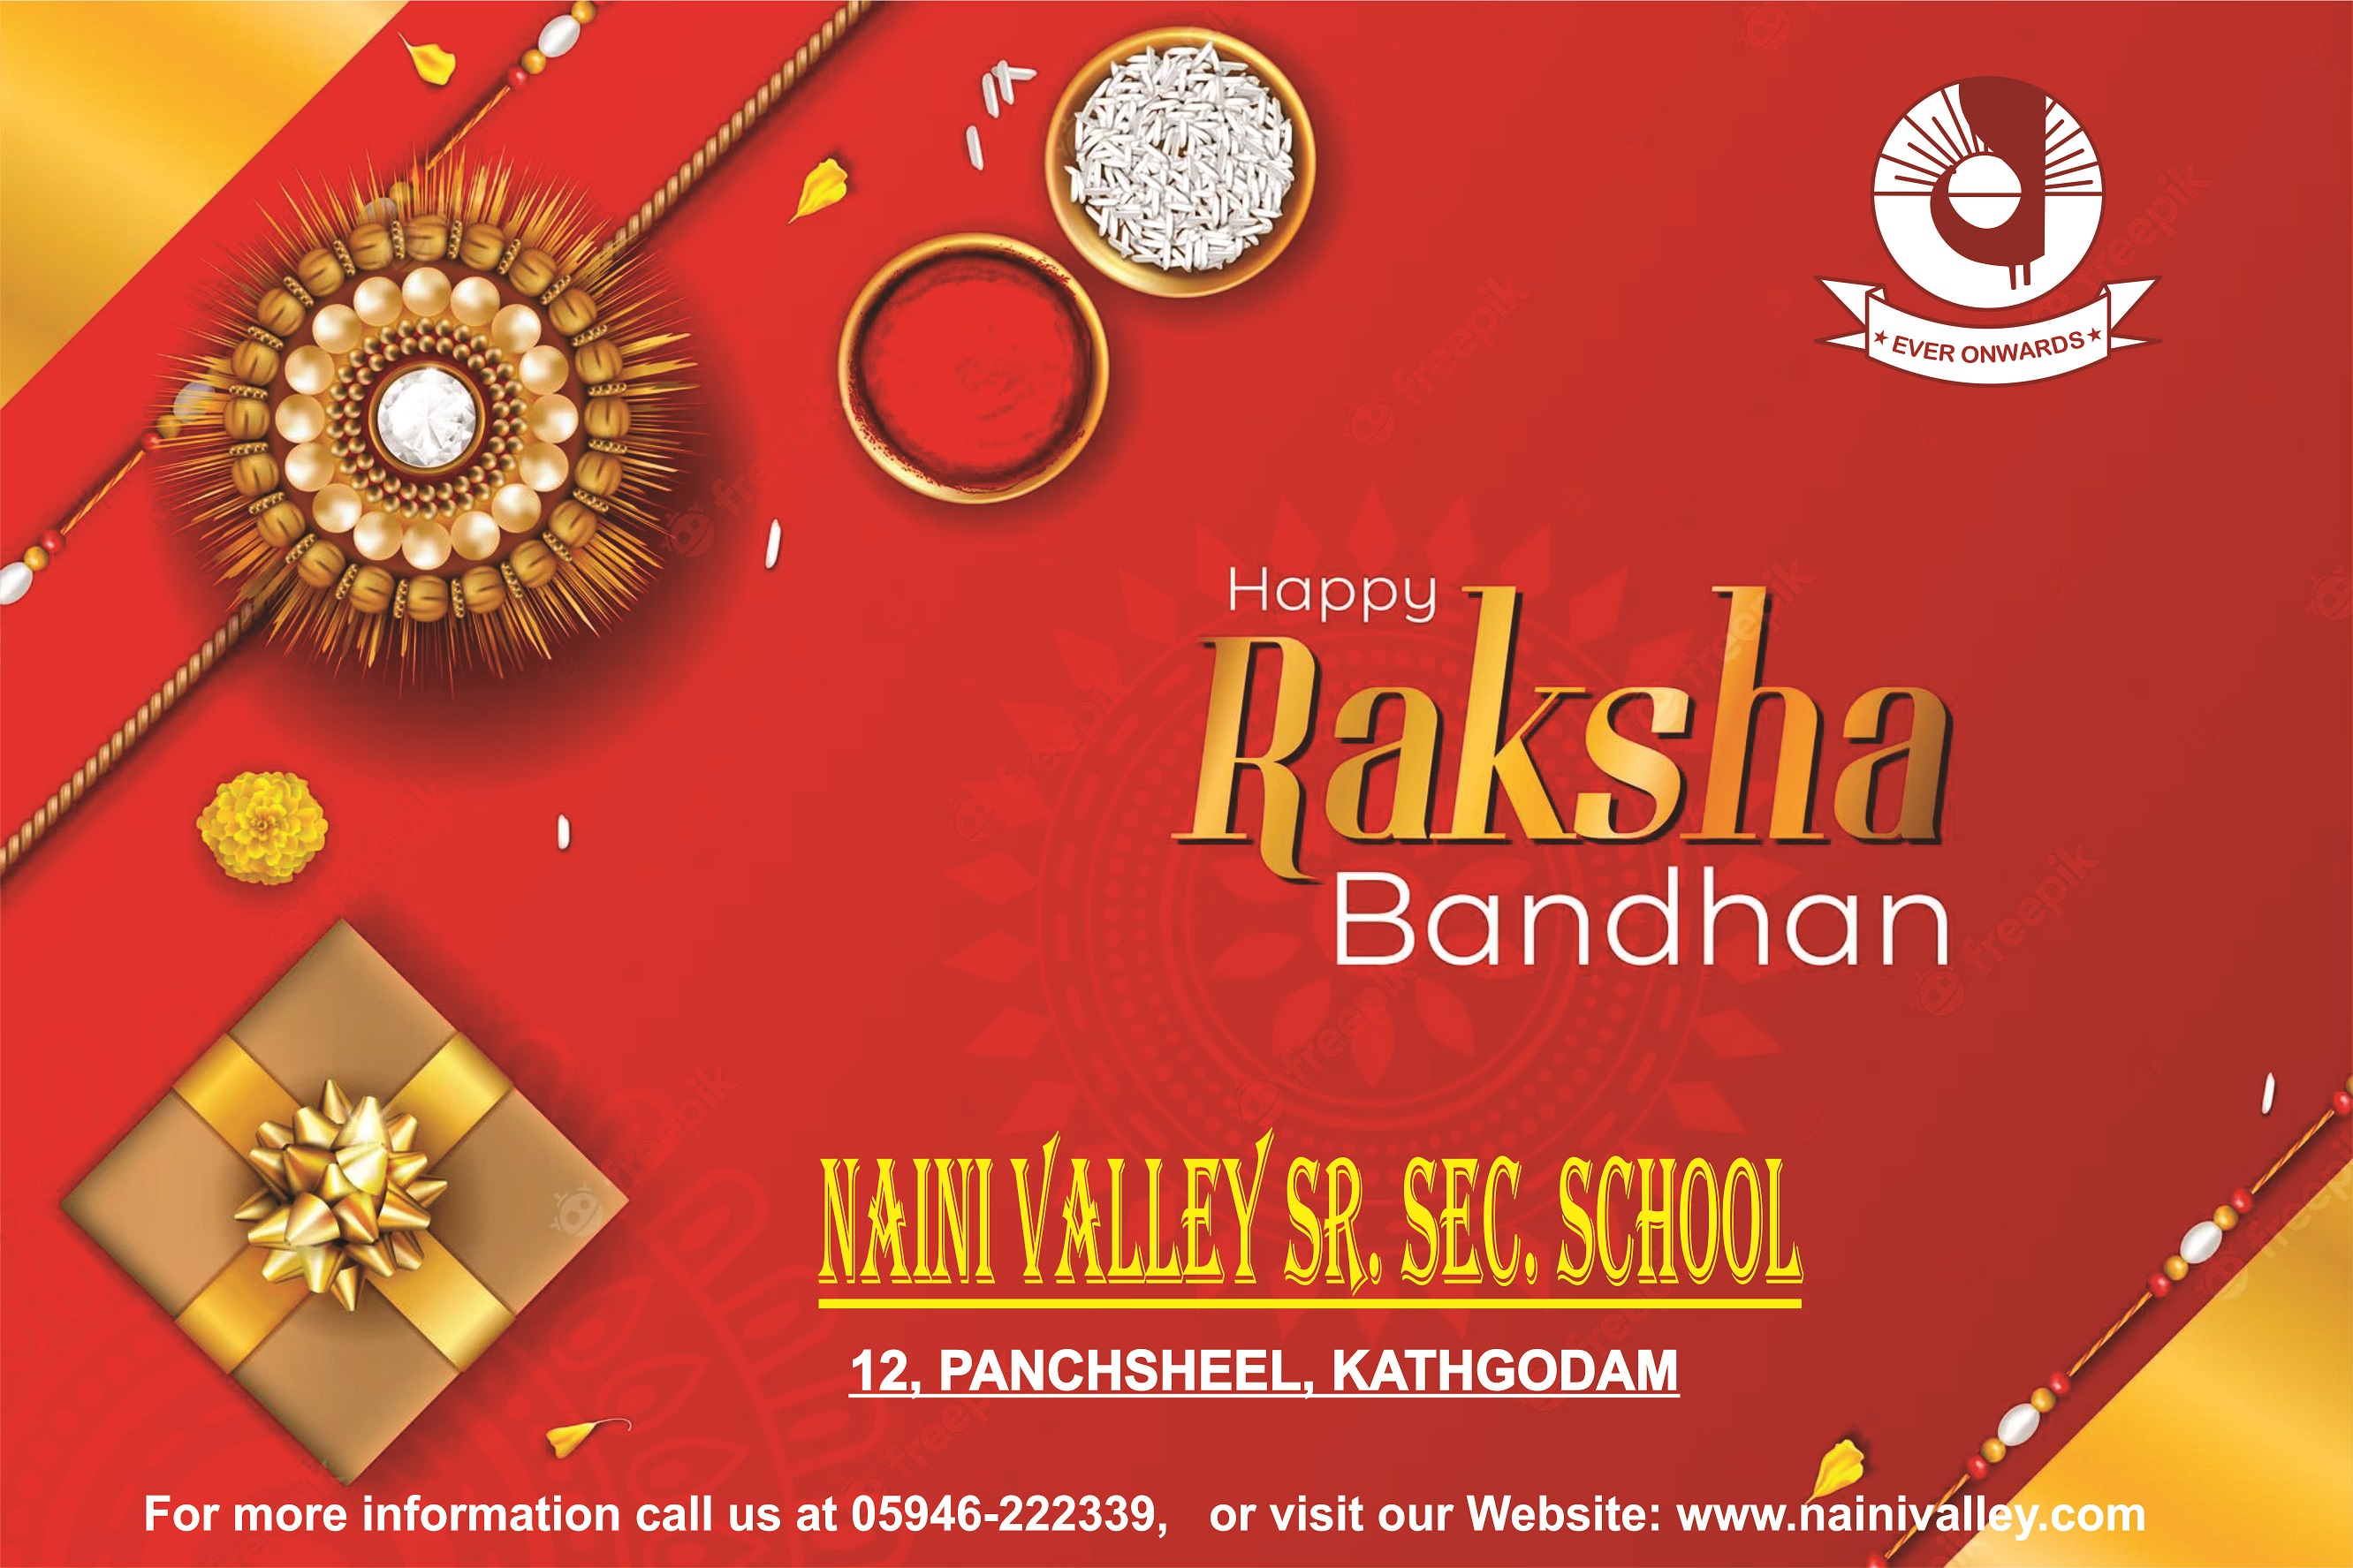 Best wishes to all of you on Rakshabandhan, the festival symbolizing sibling love....